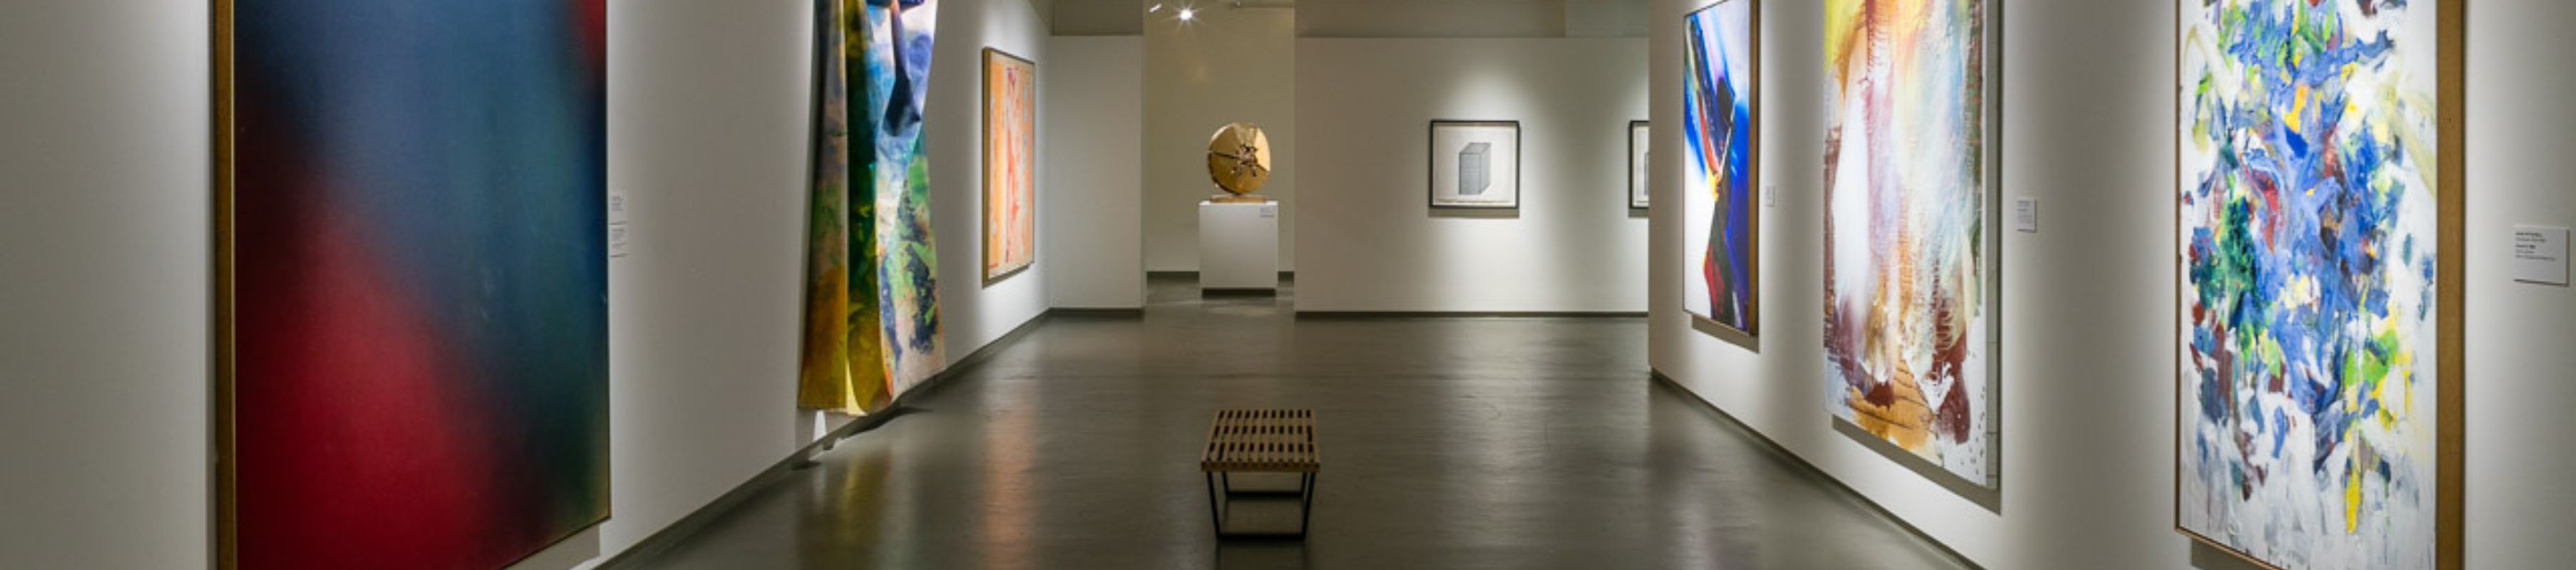 the MOCA permanent collection gallery with several paintings and a sculpture